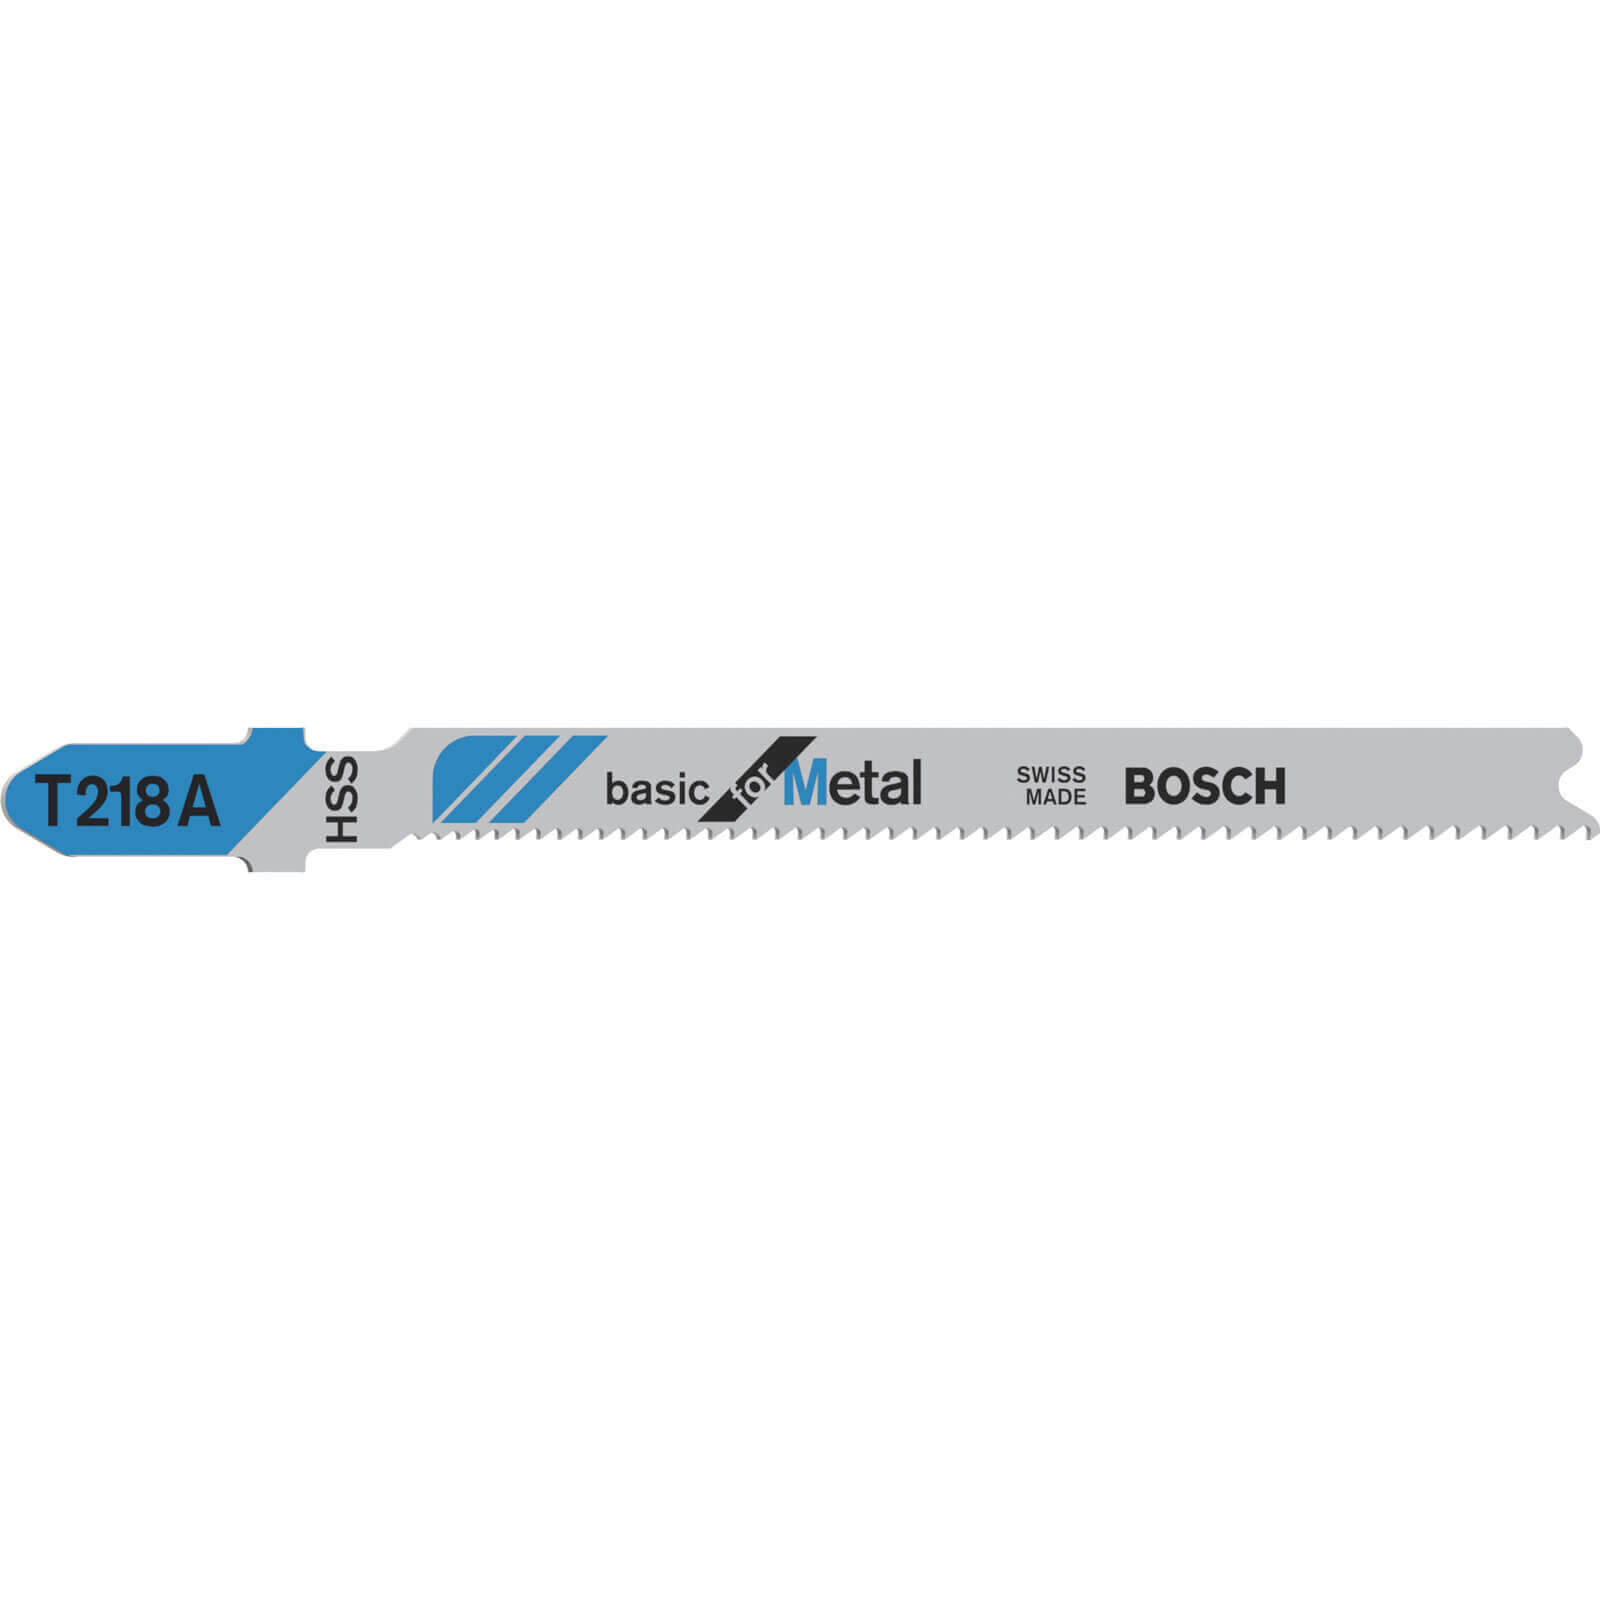 Image of Bosch T218 A Metal Cutting Jigsaw Blades Pack of 5